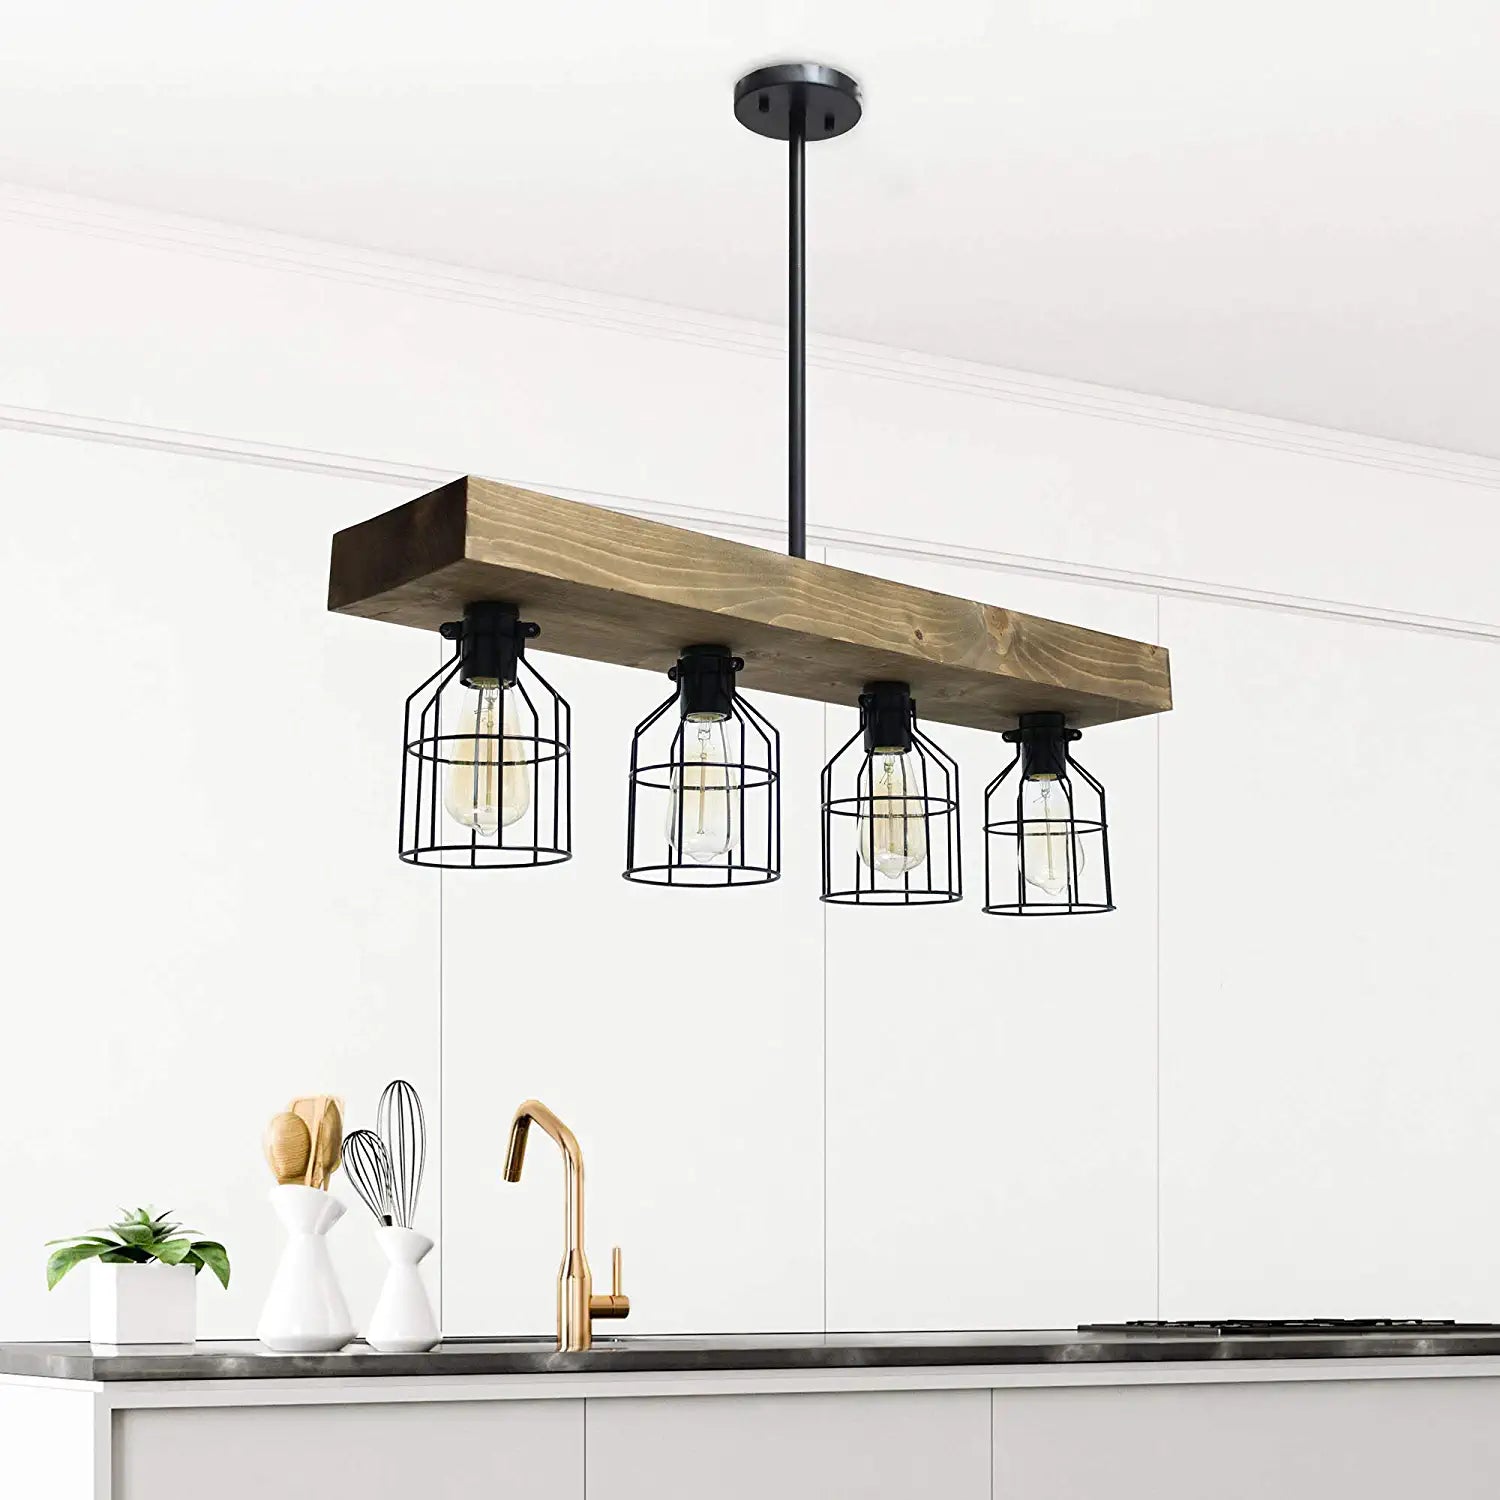 Lalia Home 4 Light Rustic Farmhouse Pendant with Restored Wood Beam and Matte Black Metal Cage Shade